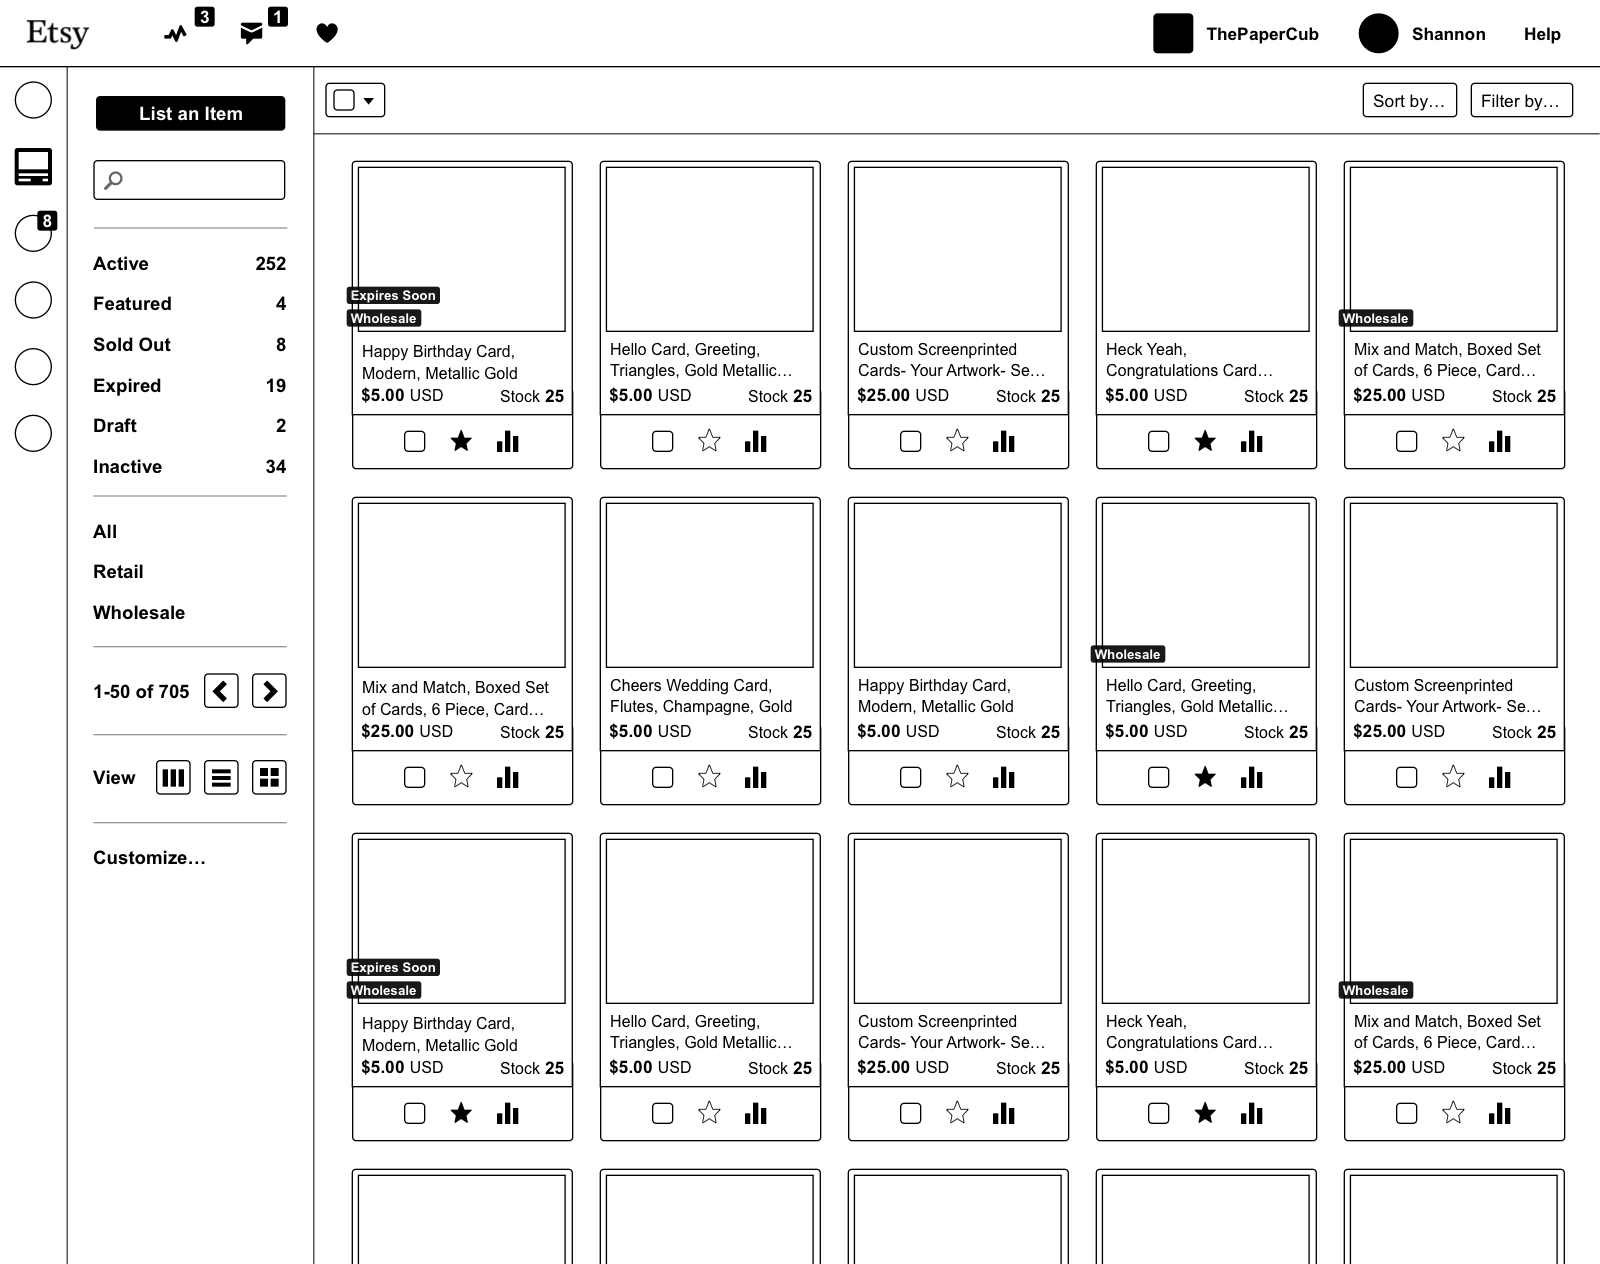 An early wireframe for the new listings manager